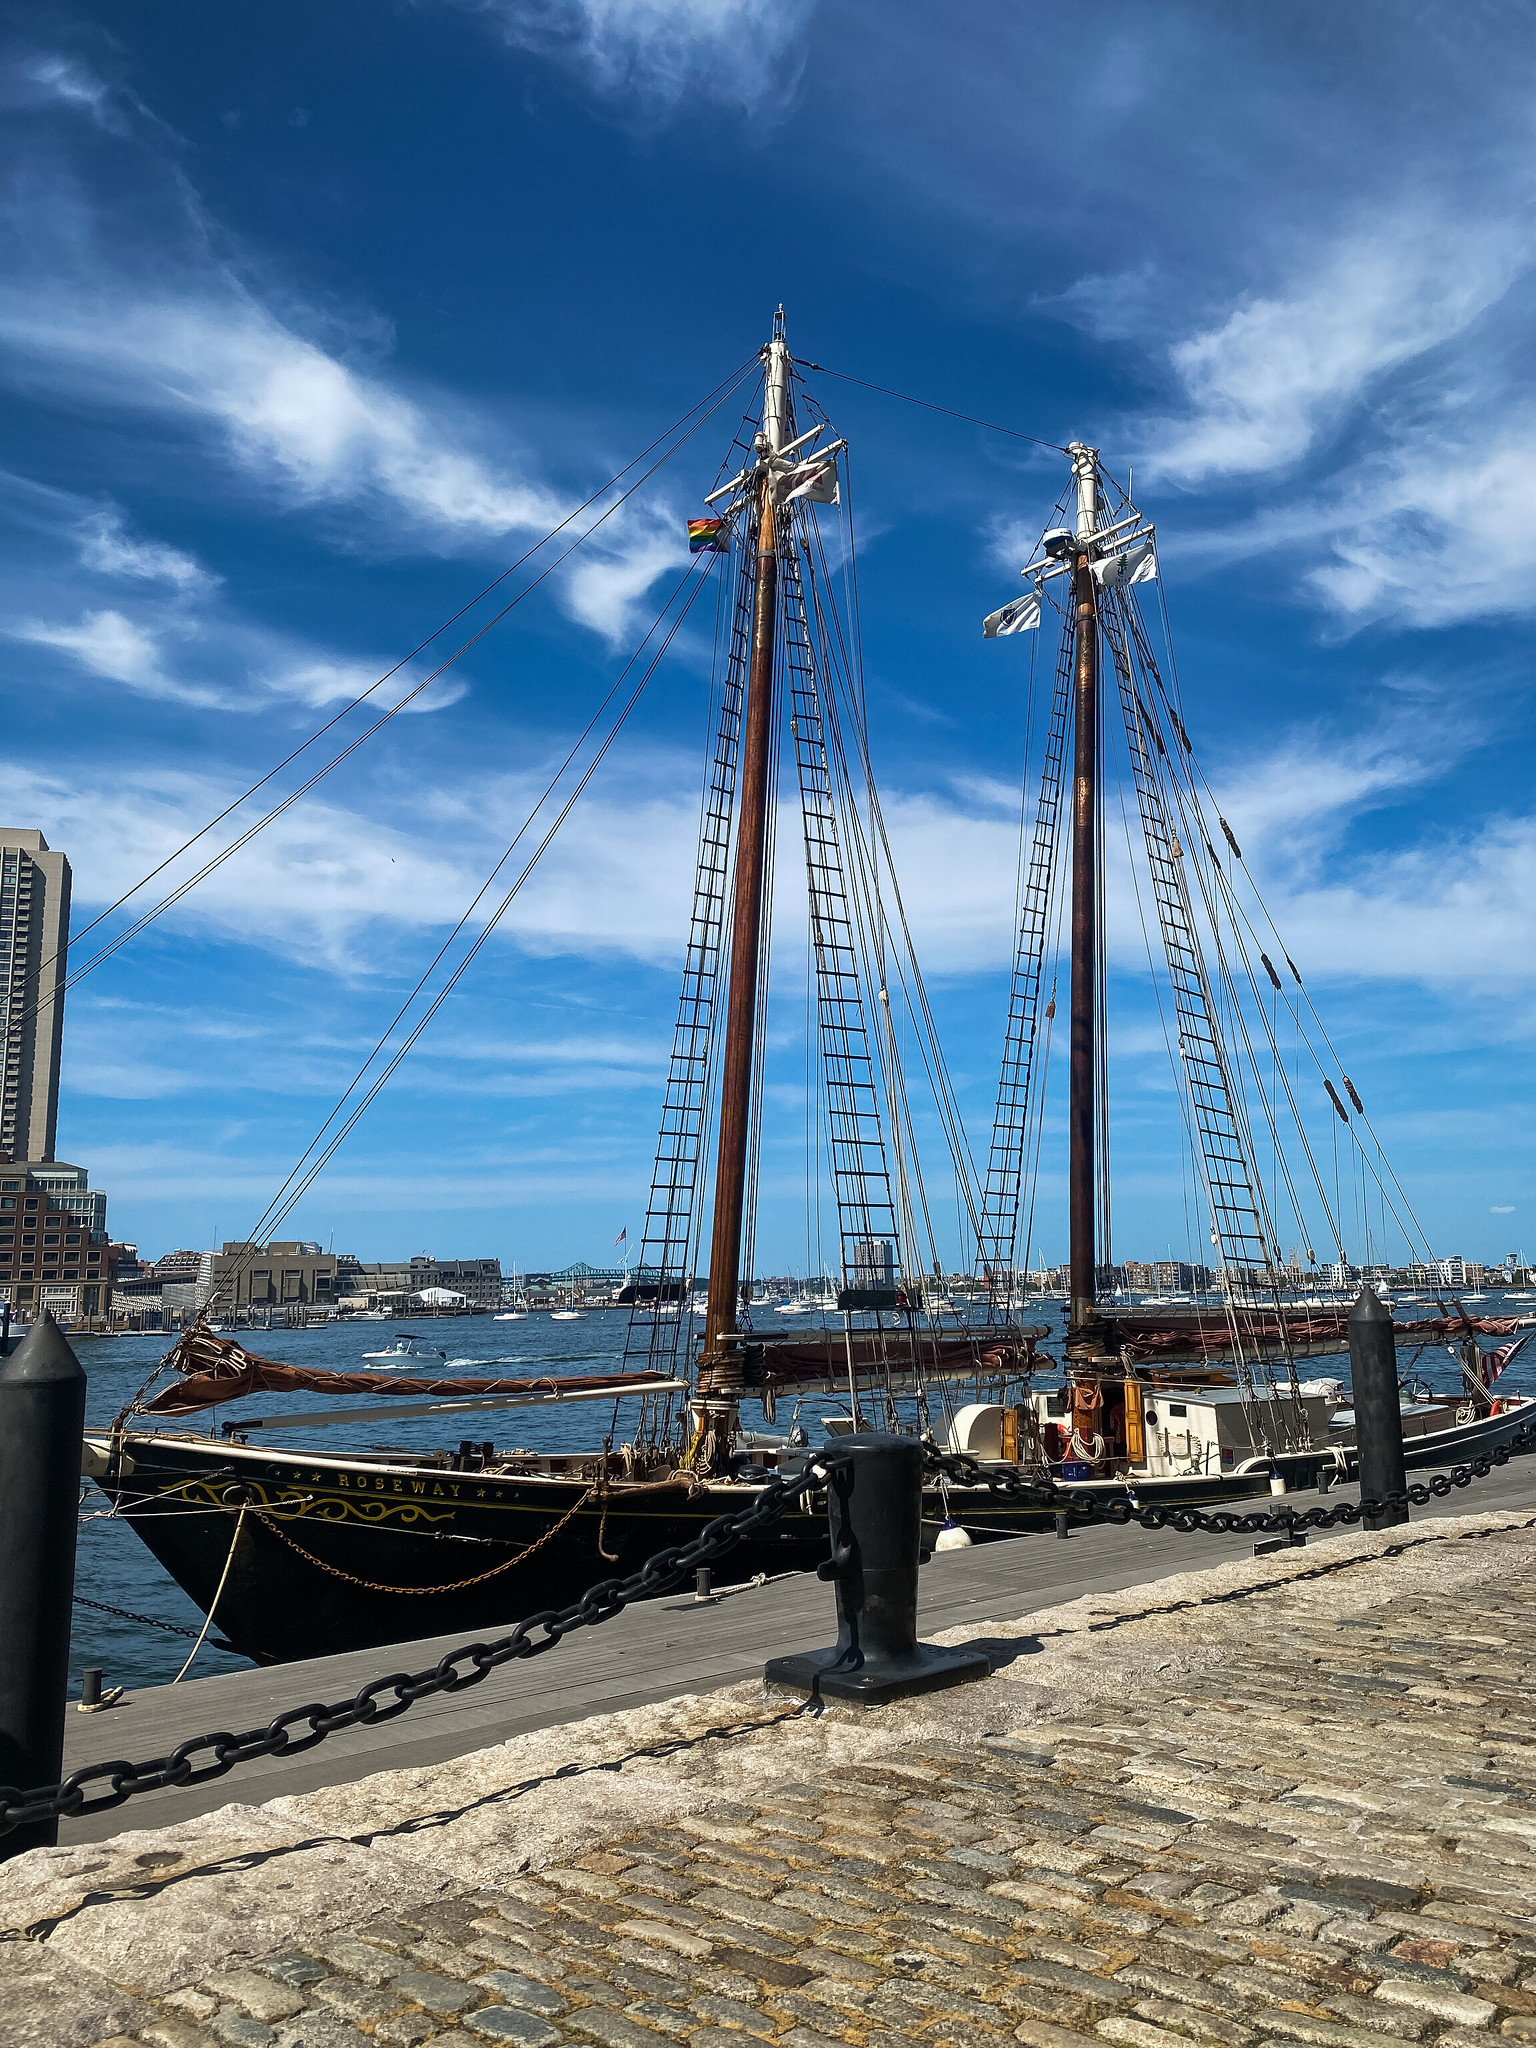 Boston Seaport | Harborwalk | What to See in Boston | 2 Days in Boston | 48 Hours in Boston | The Perfect Weekend Itinerary | Best Things to Do in Boston | Explore Boston, MA | Weekend in Boston, Massachusetts | Boston Travel Guide | Top Things to do in Boston